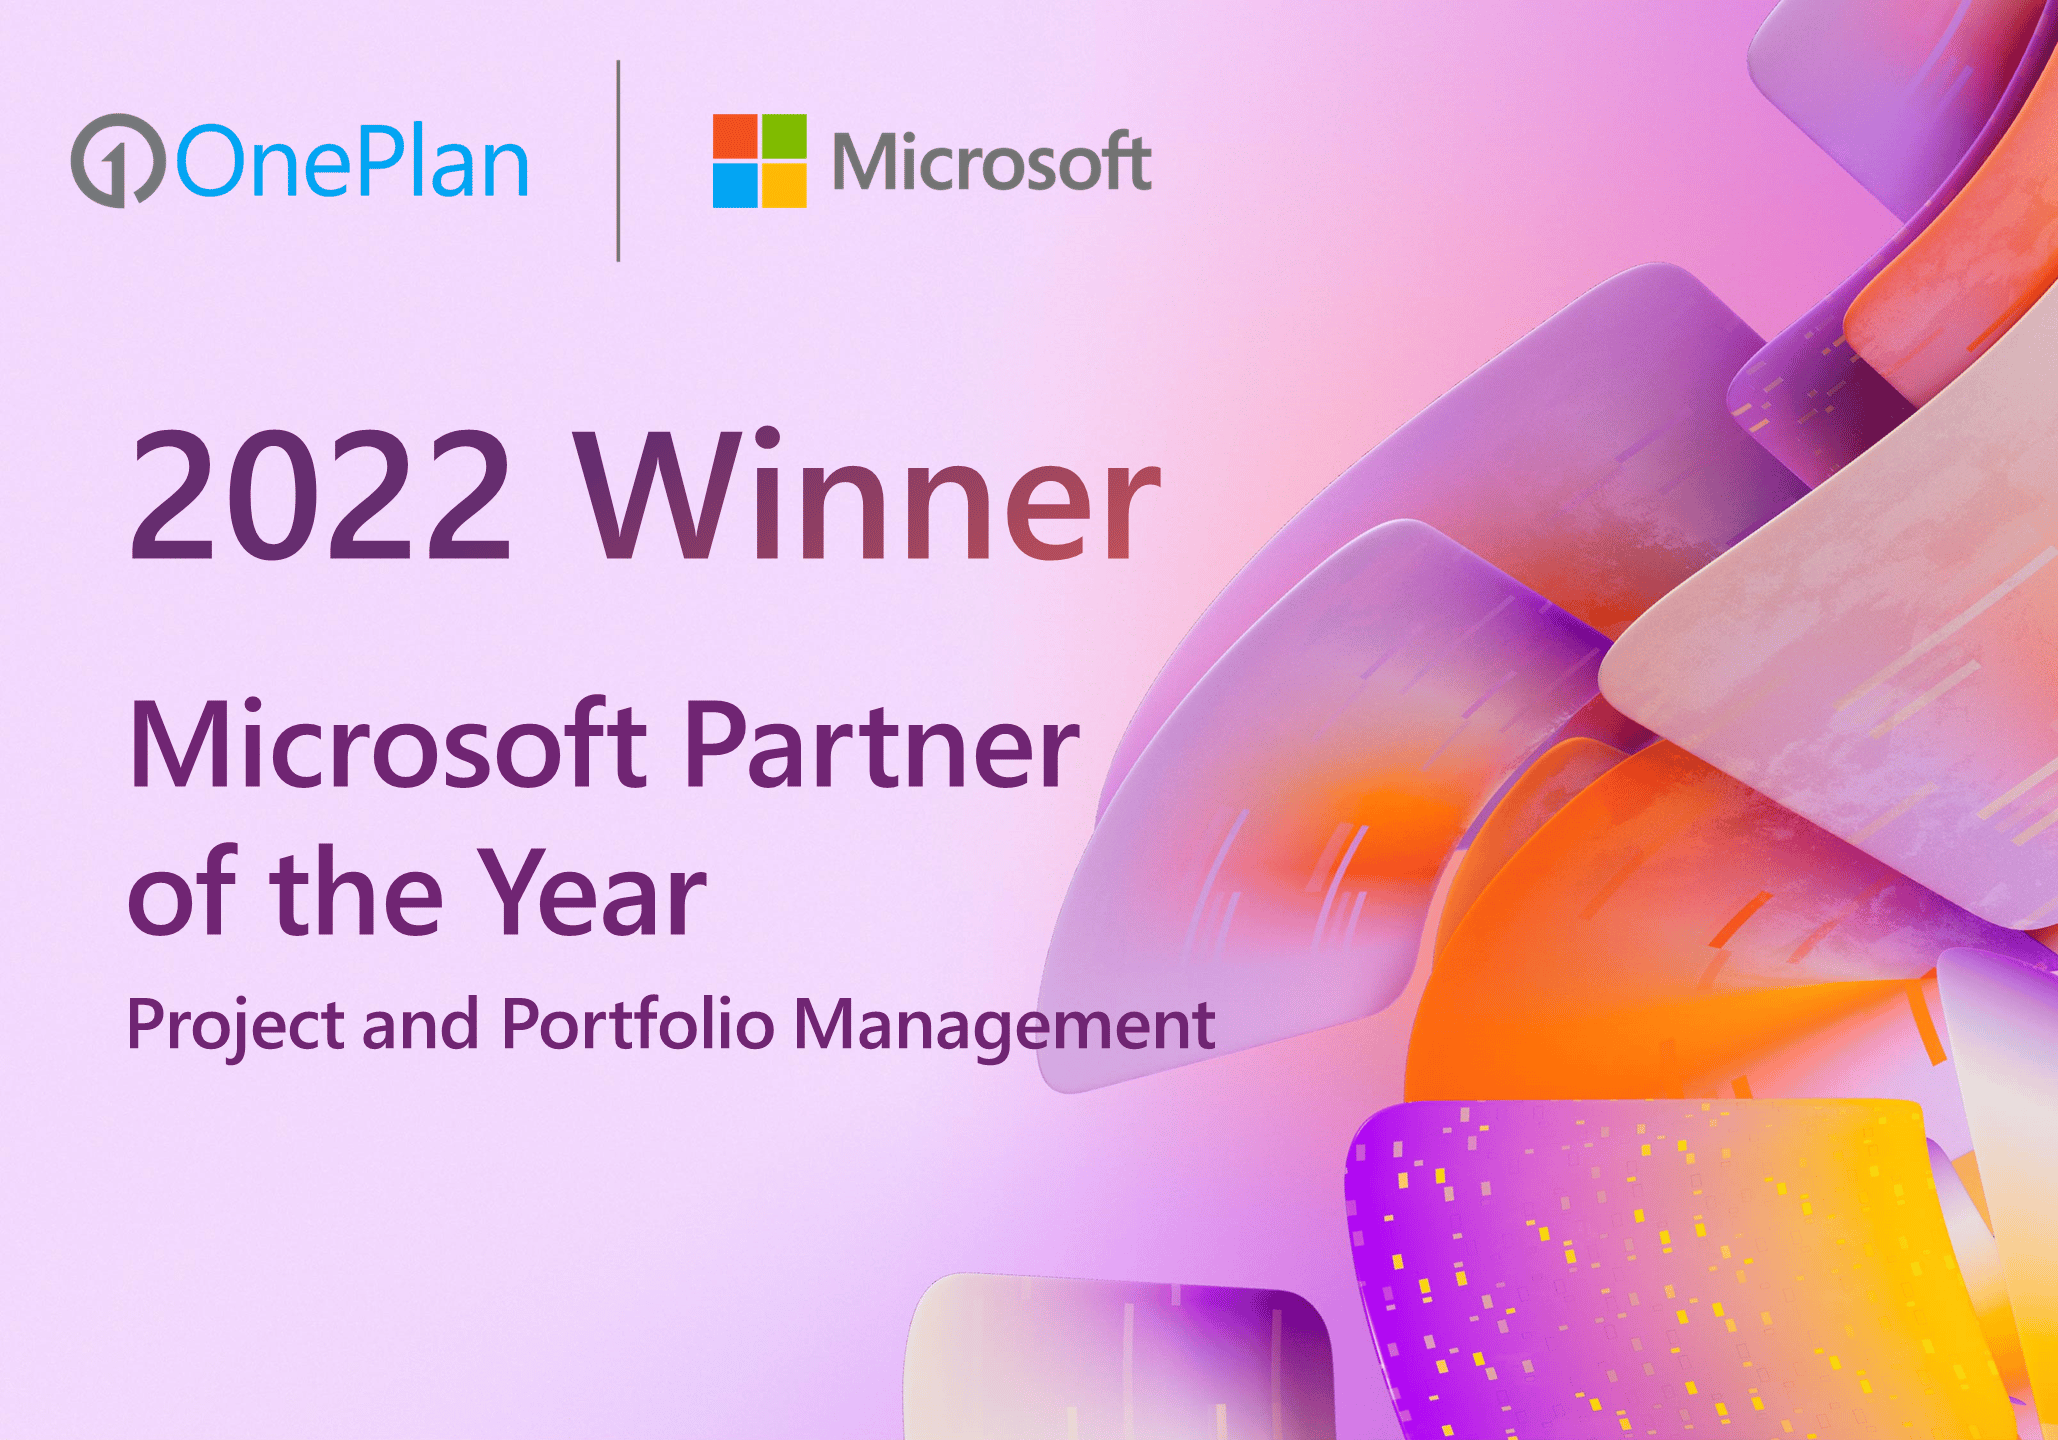 OnePlan Recognized Back-to-Back as Microsoft’s Global Partner of the Year for Project & Portfolio Management in 2021 and 2022